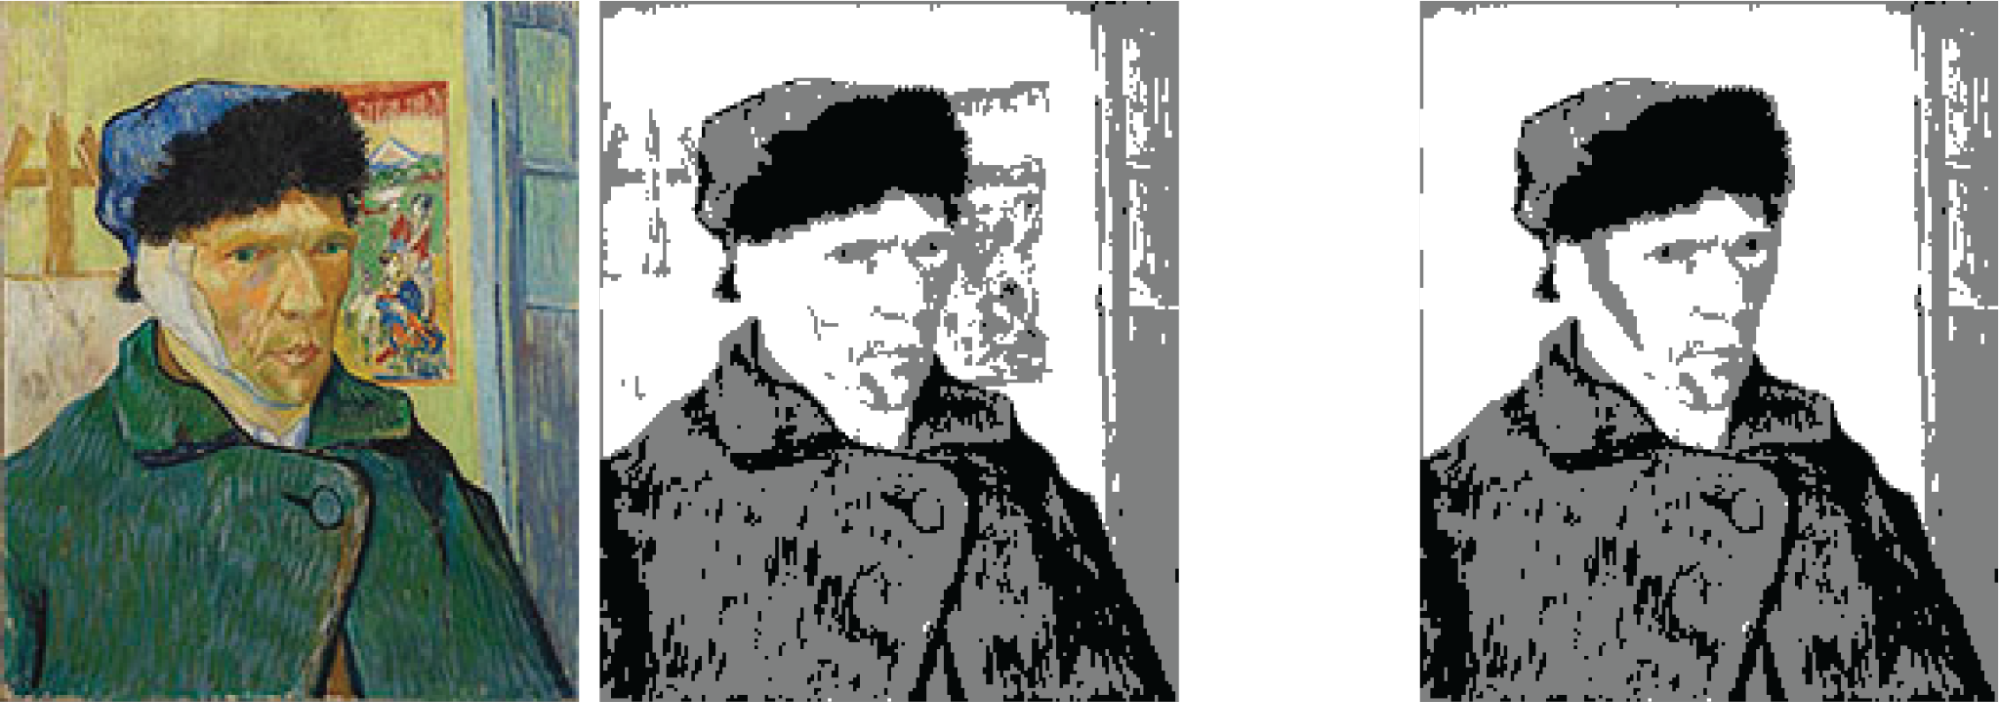 Three images. The first is of the normal, full-colour, full-detail Self-Portrait input. The second has been quantized into just white, gray, and black. The third has had detail on the wall removed so that Van Gogh's portrait is the only thing in the middle of the image.